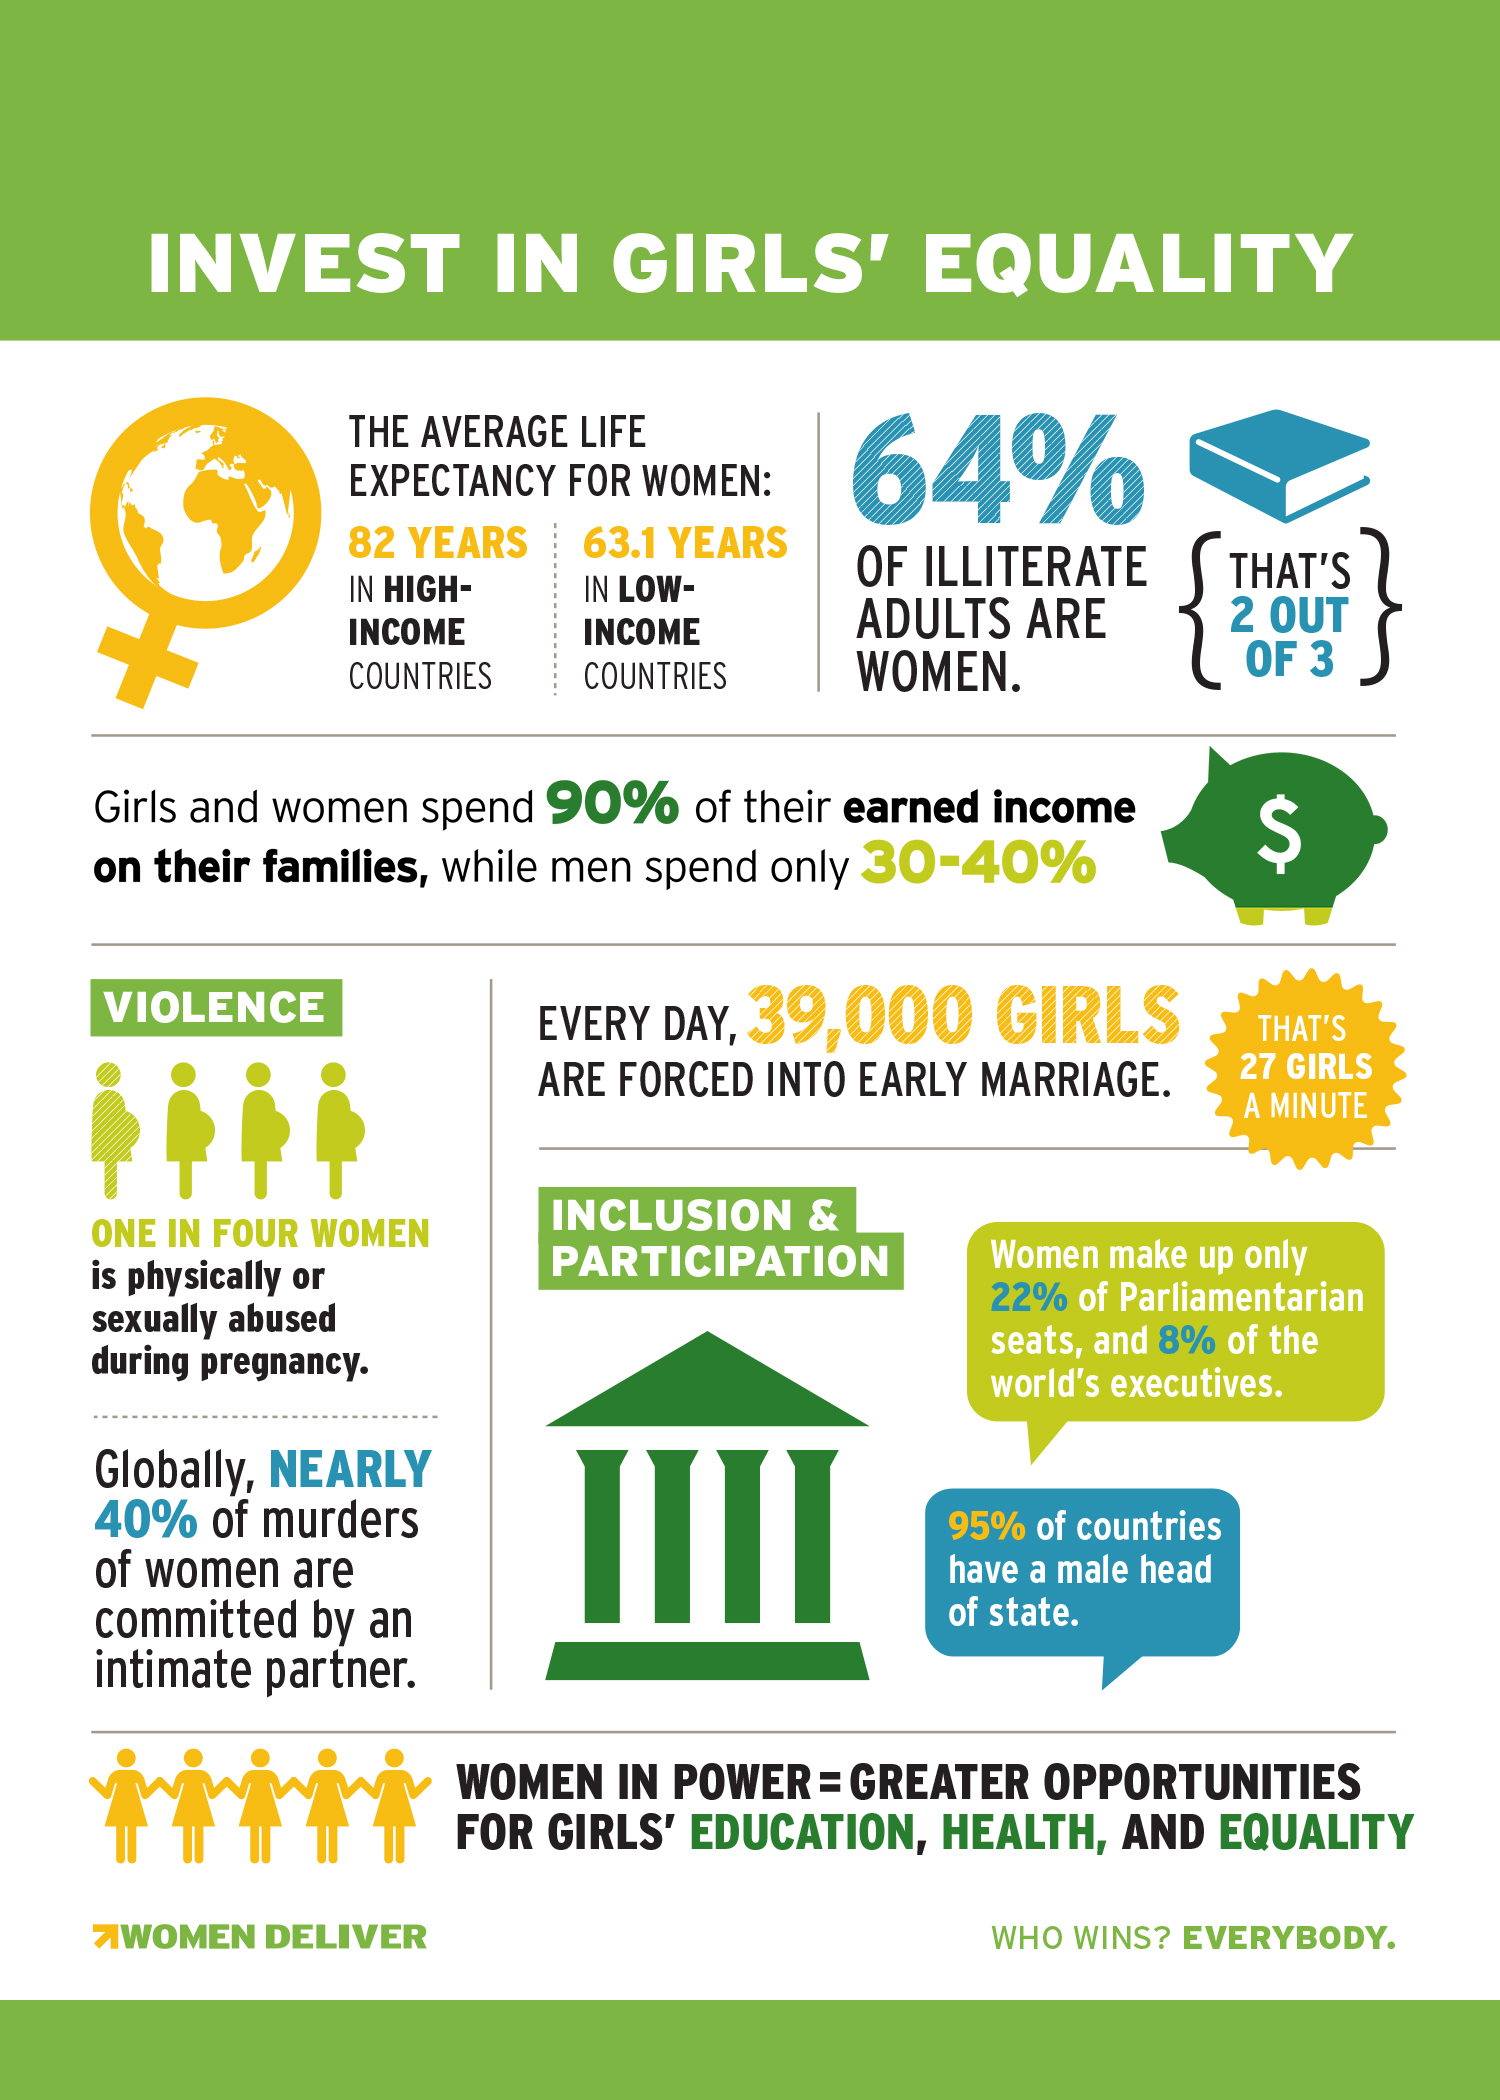 Infograph courtesy: Women Deliver